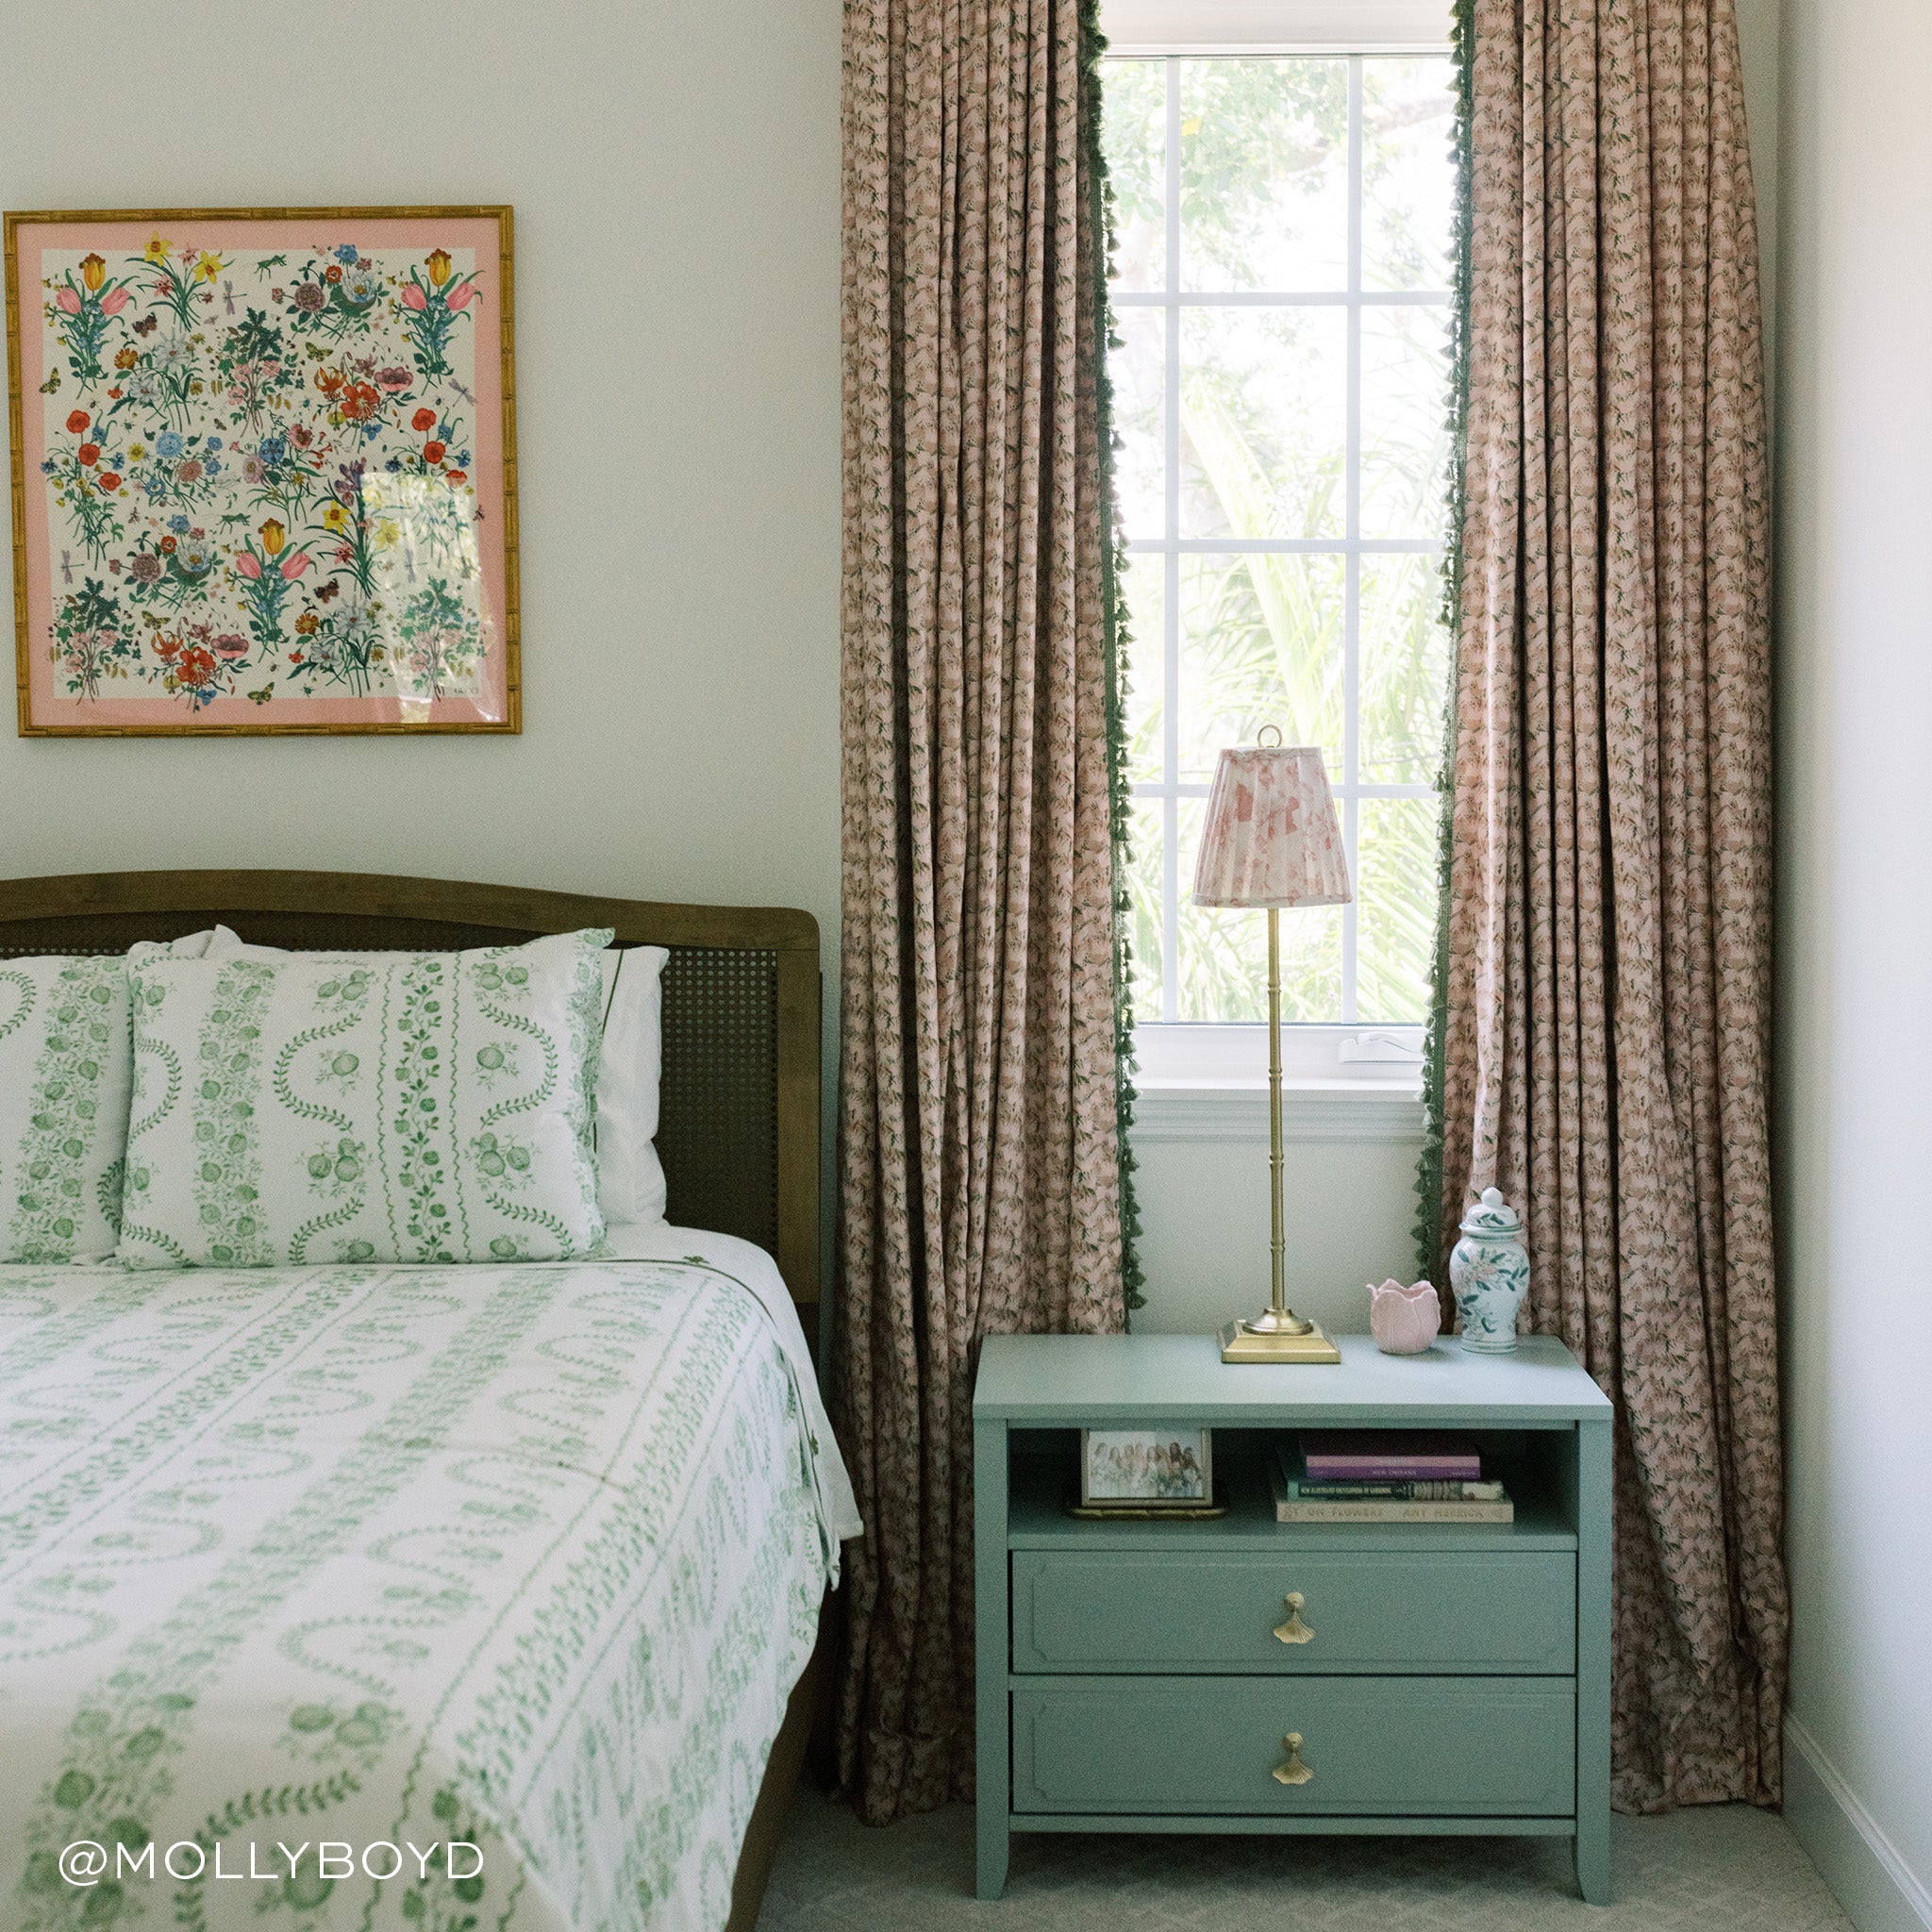 Bedroom styled with pink and gold lamp on turquoise night stand in front of window with Pink Floral Printed Curtains with Sage Tassel next to white bed with green designs under floral artwork on top. Photo taken by Molly Boyd